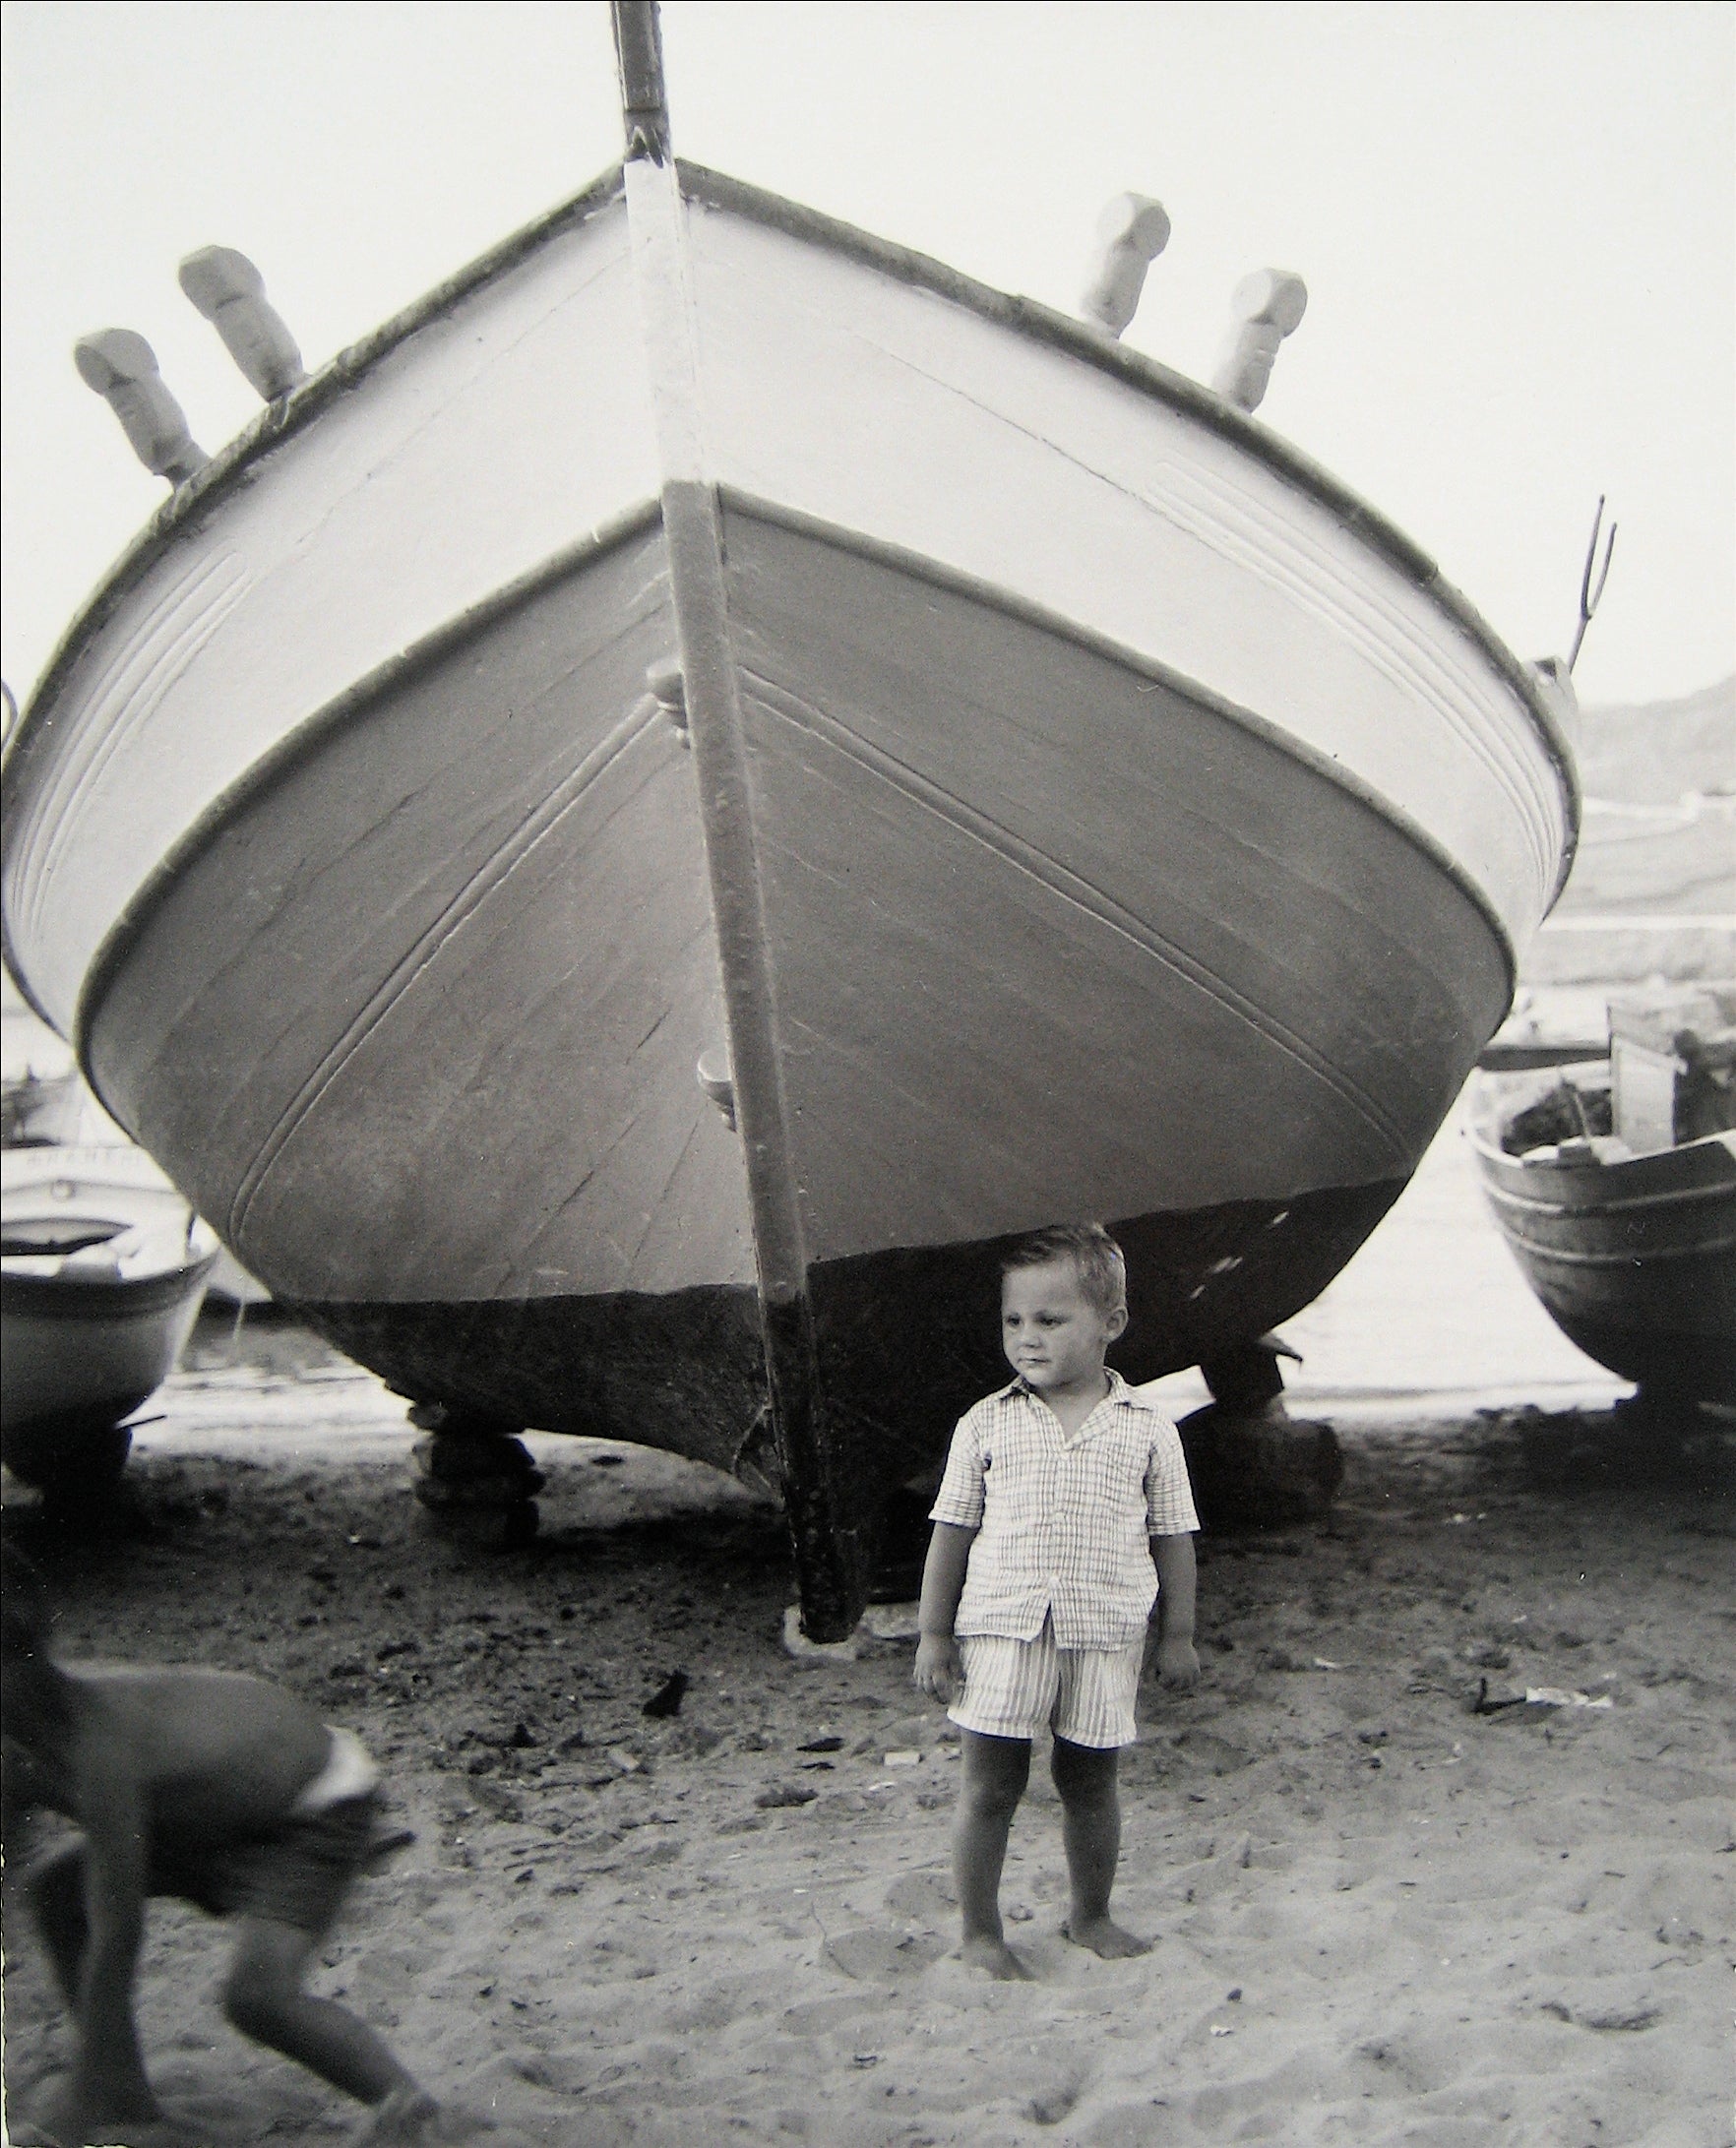 By The Boat <br>1960s Photograph <br><br>#16273